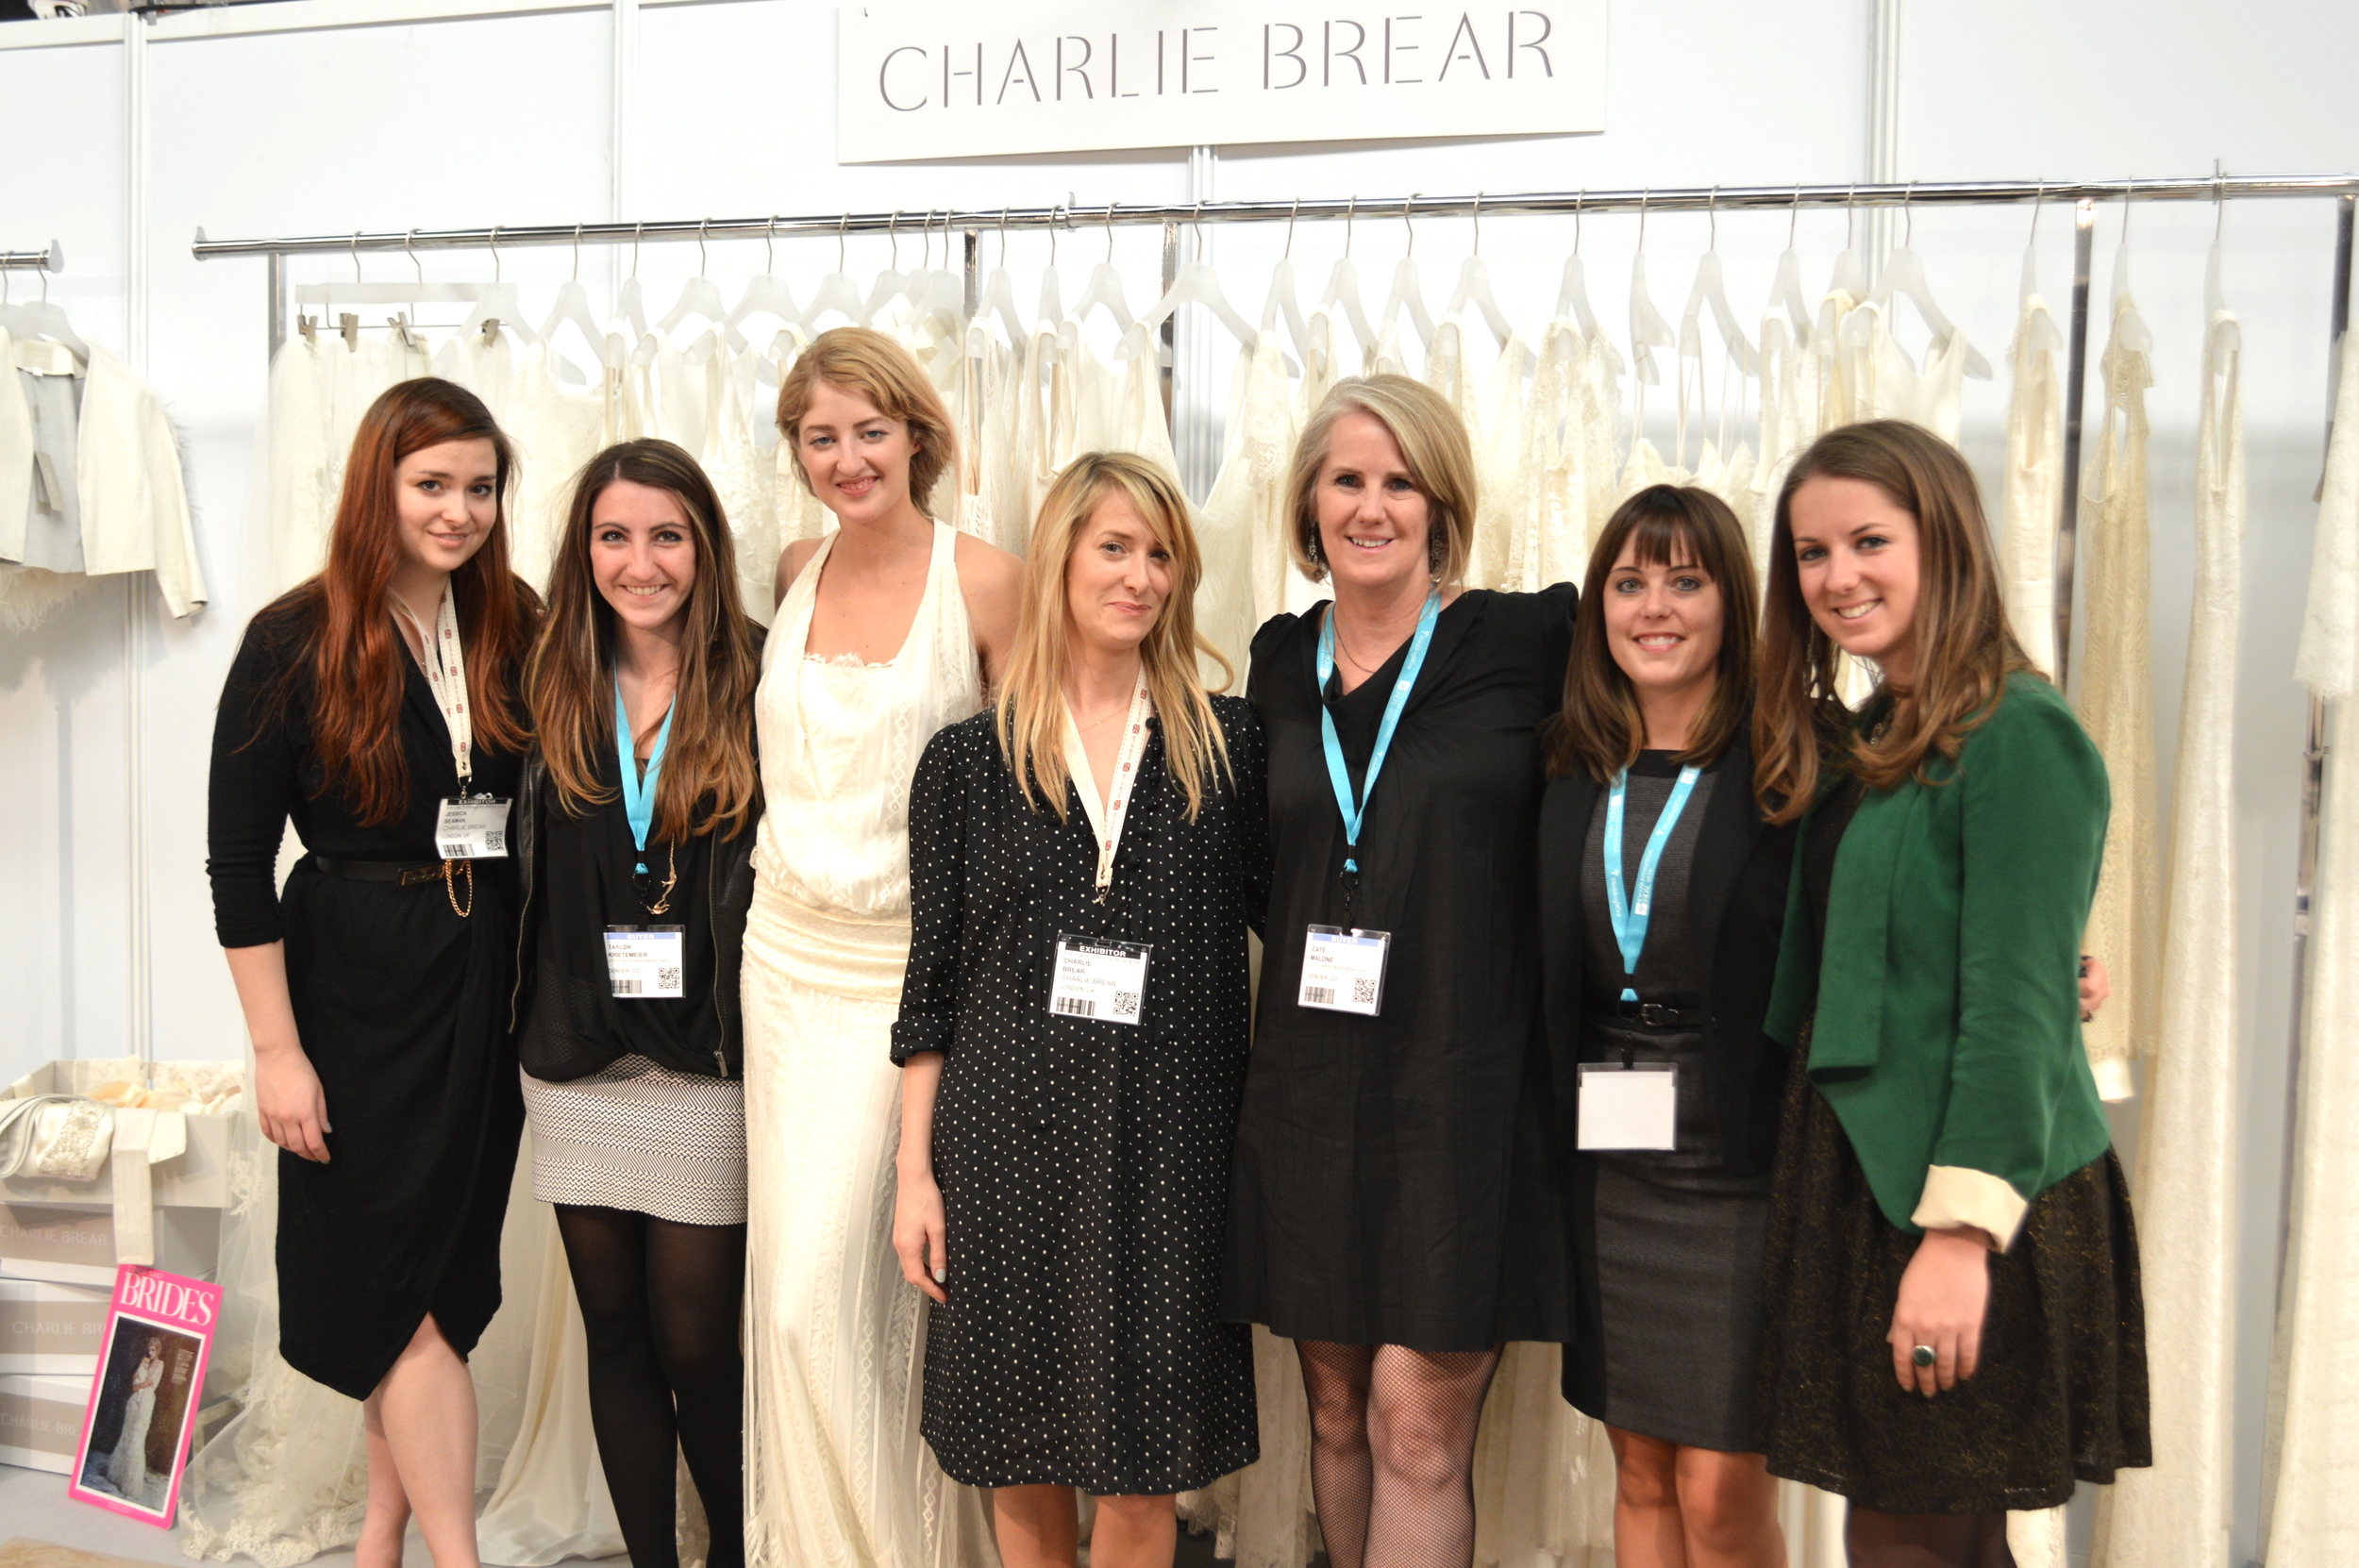 The Little White Dress Bridal Shop ladies with Charlie Brear and her team at New York Bridal Fashion Week.